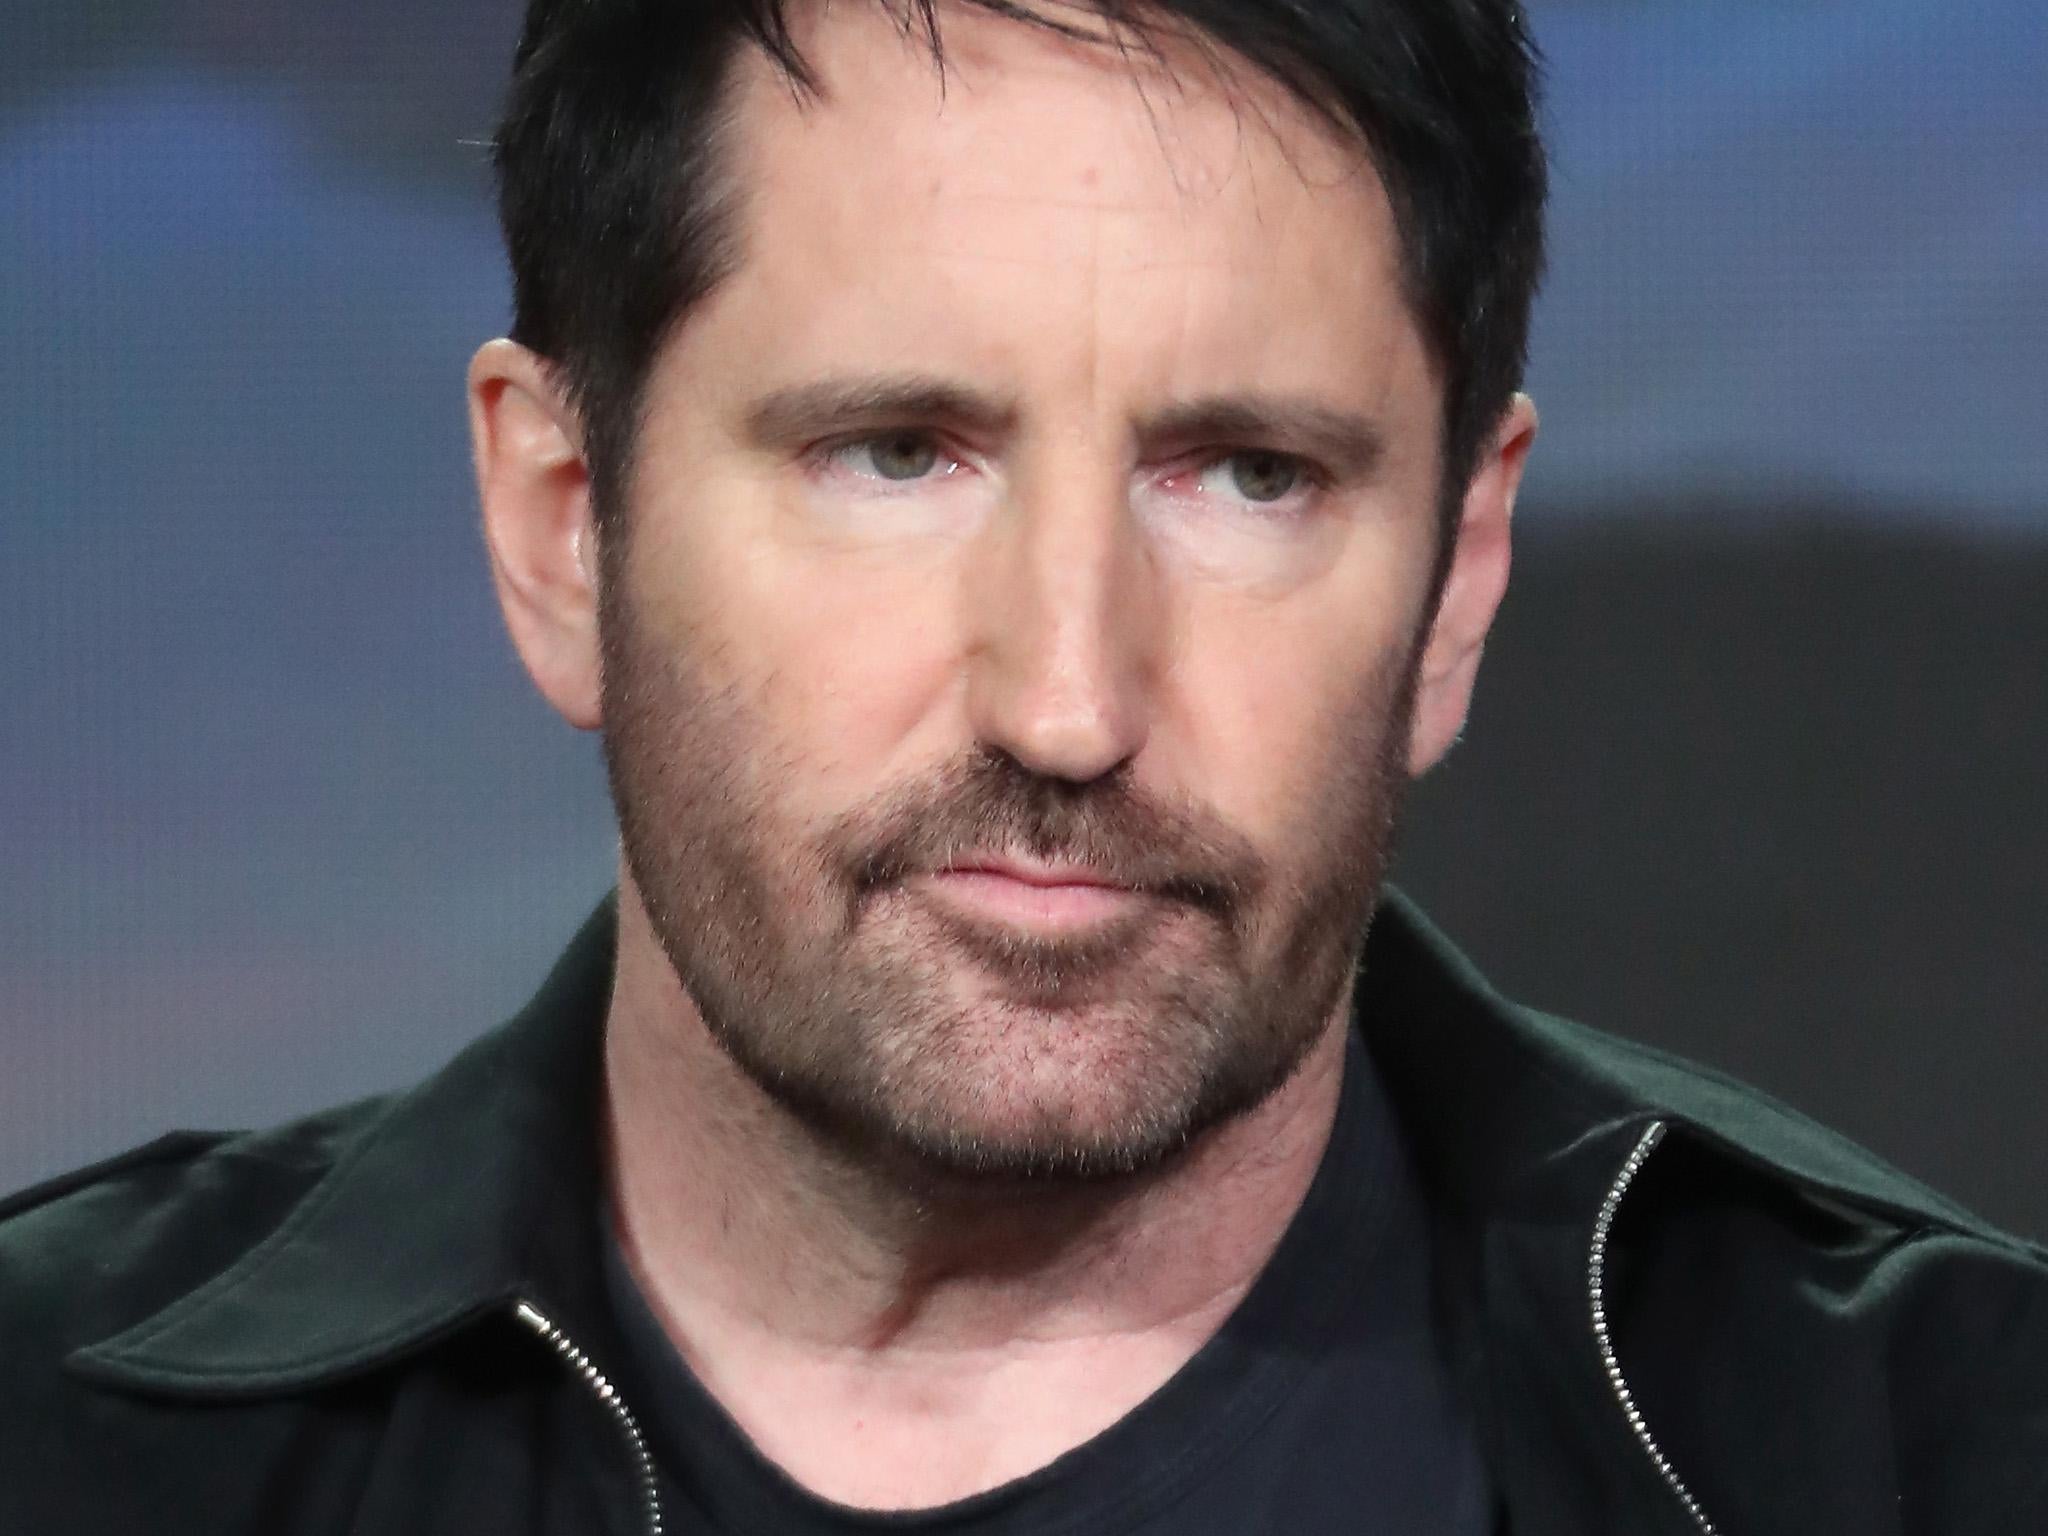 Musician and composer Trent Reznor is in the new cast of 'Twin Peaks'